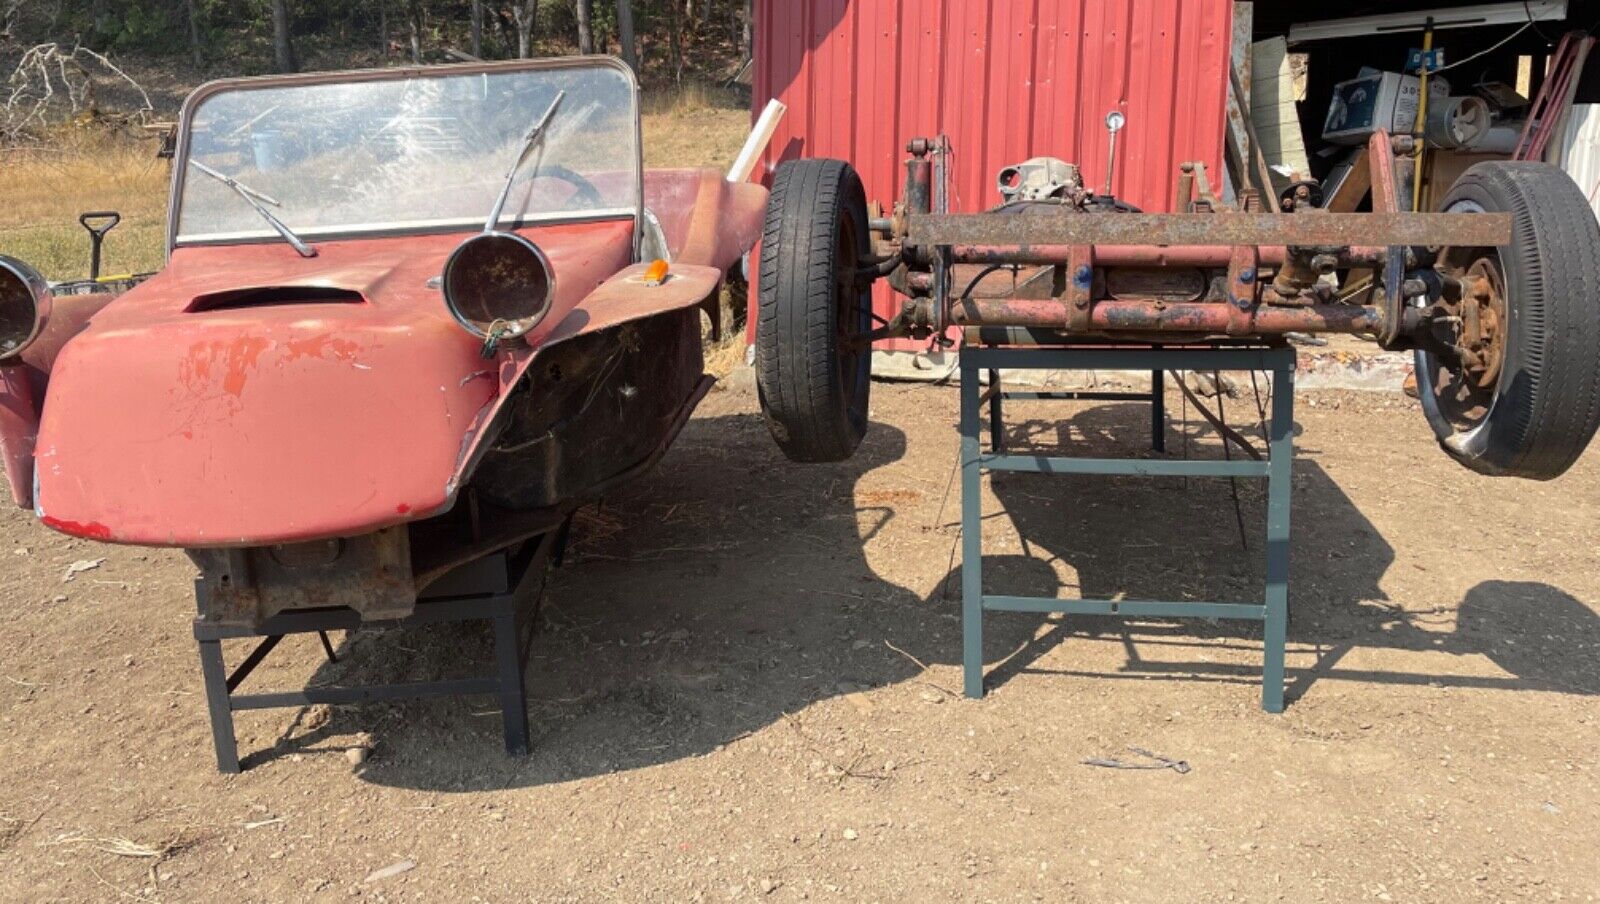 Building a dune buggy? Manx copycat body with 1960’s VW chassis cut to fit